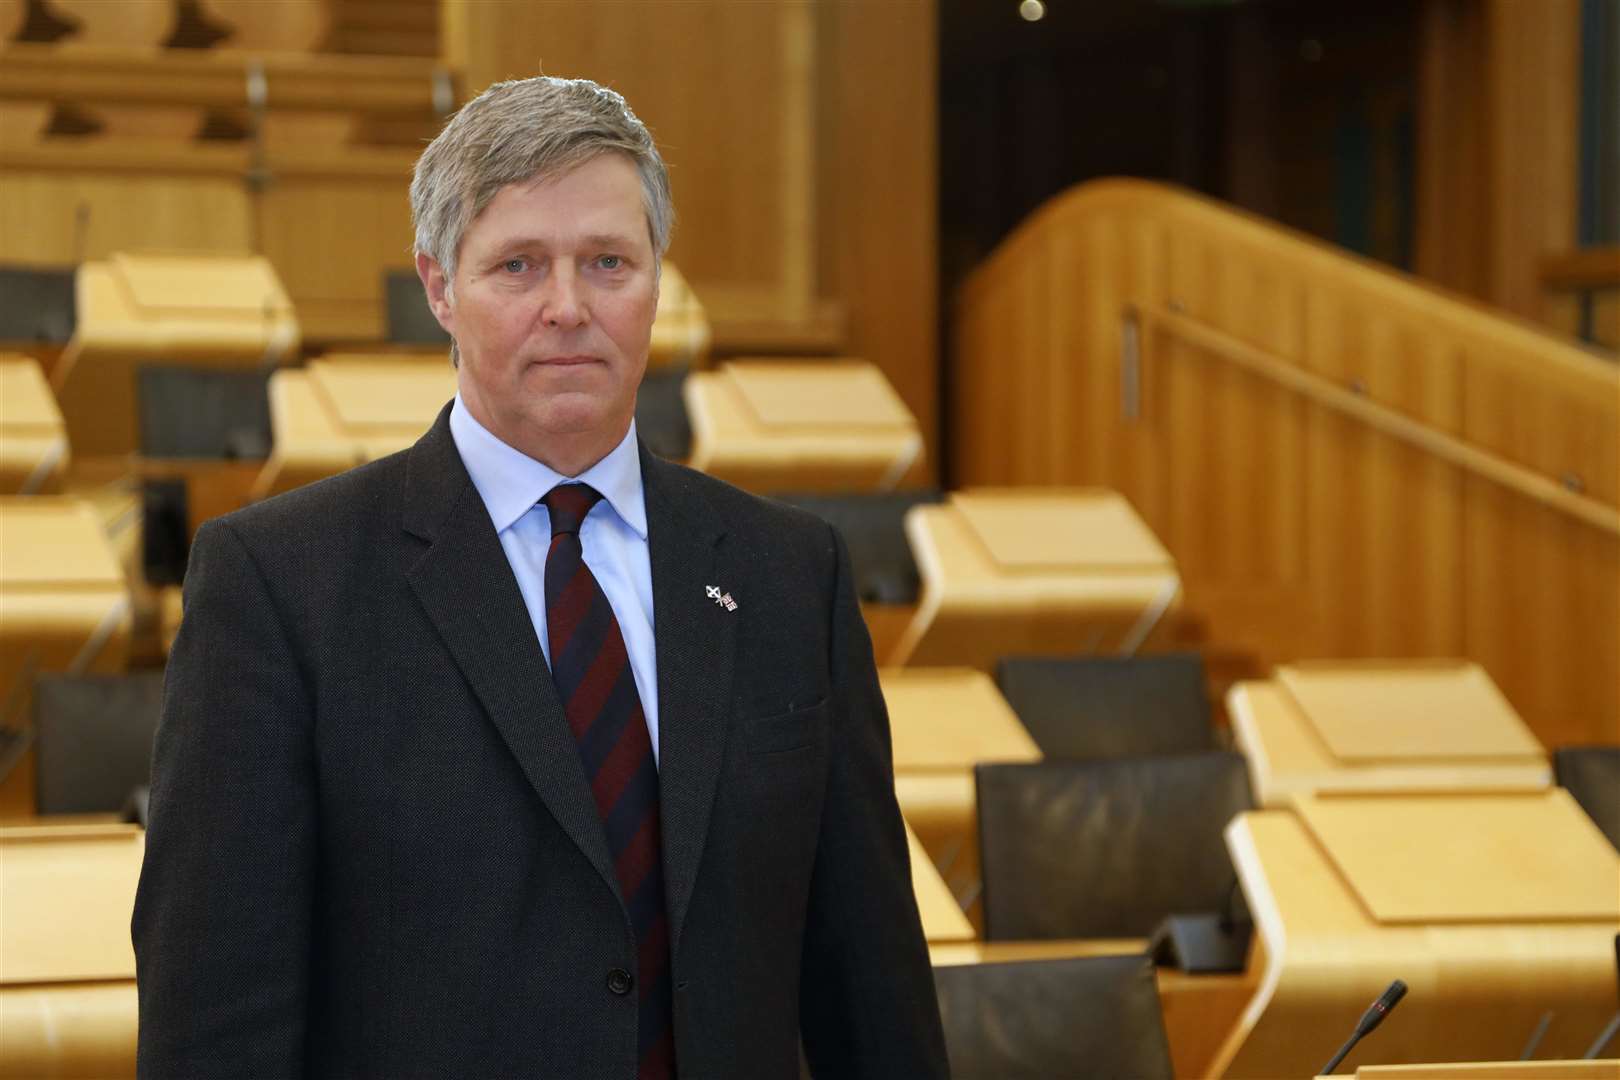 Edward Mountain asked what was being done to secure more specialist support in the Highlands.